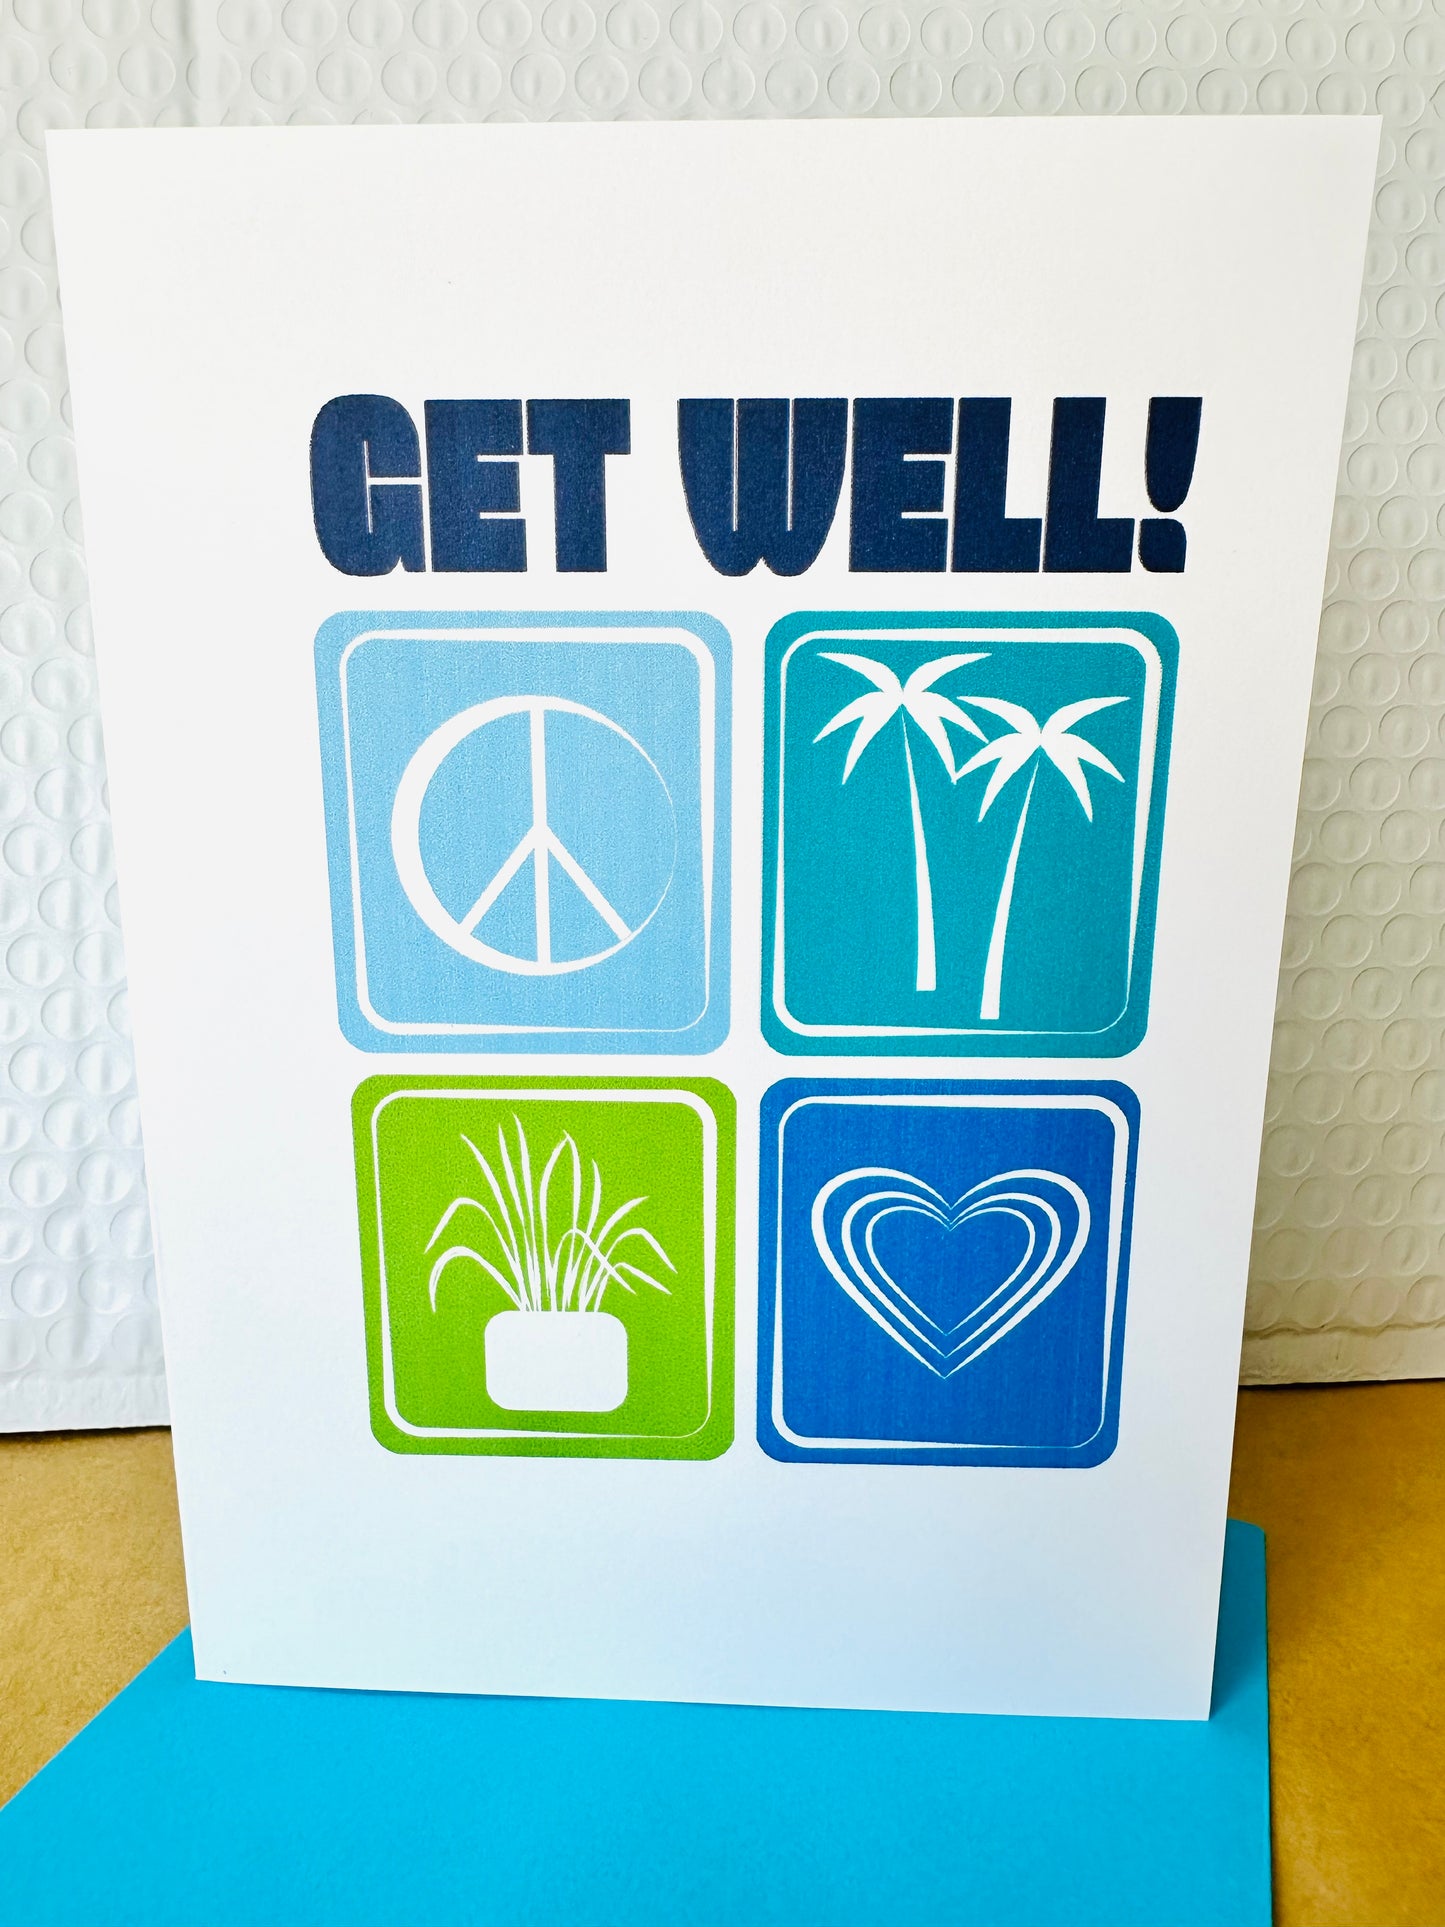 Get Well! Wishing you a speedy recovery! hearts and plants 5x7 Greeting card